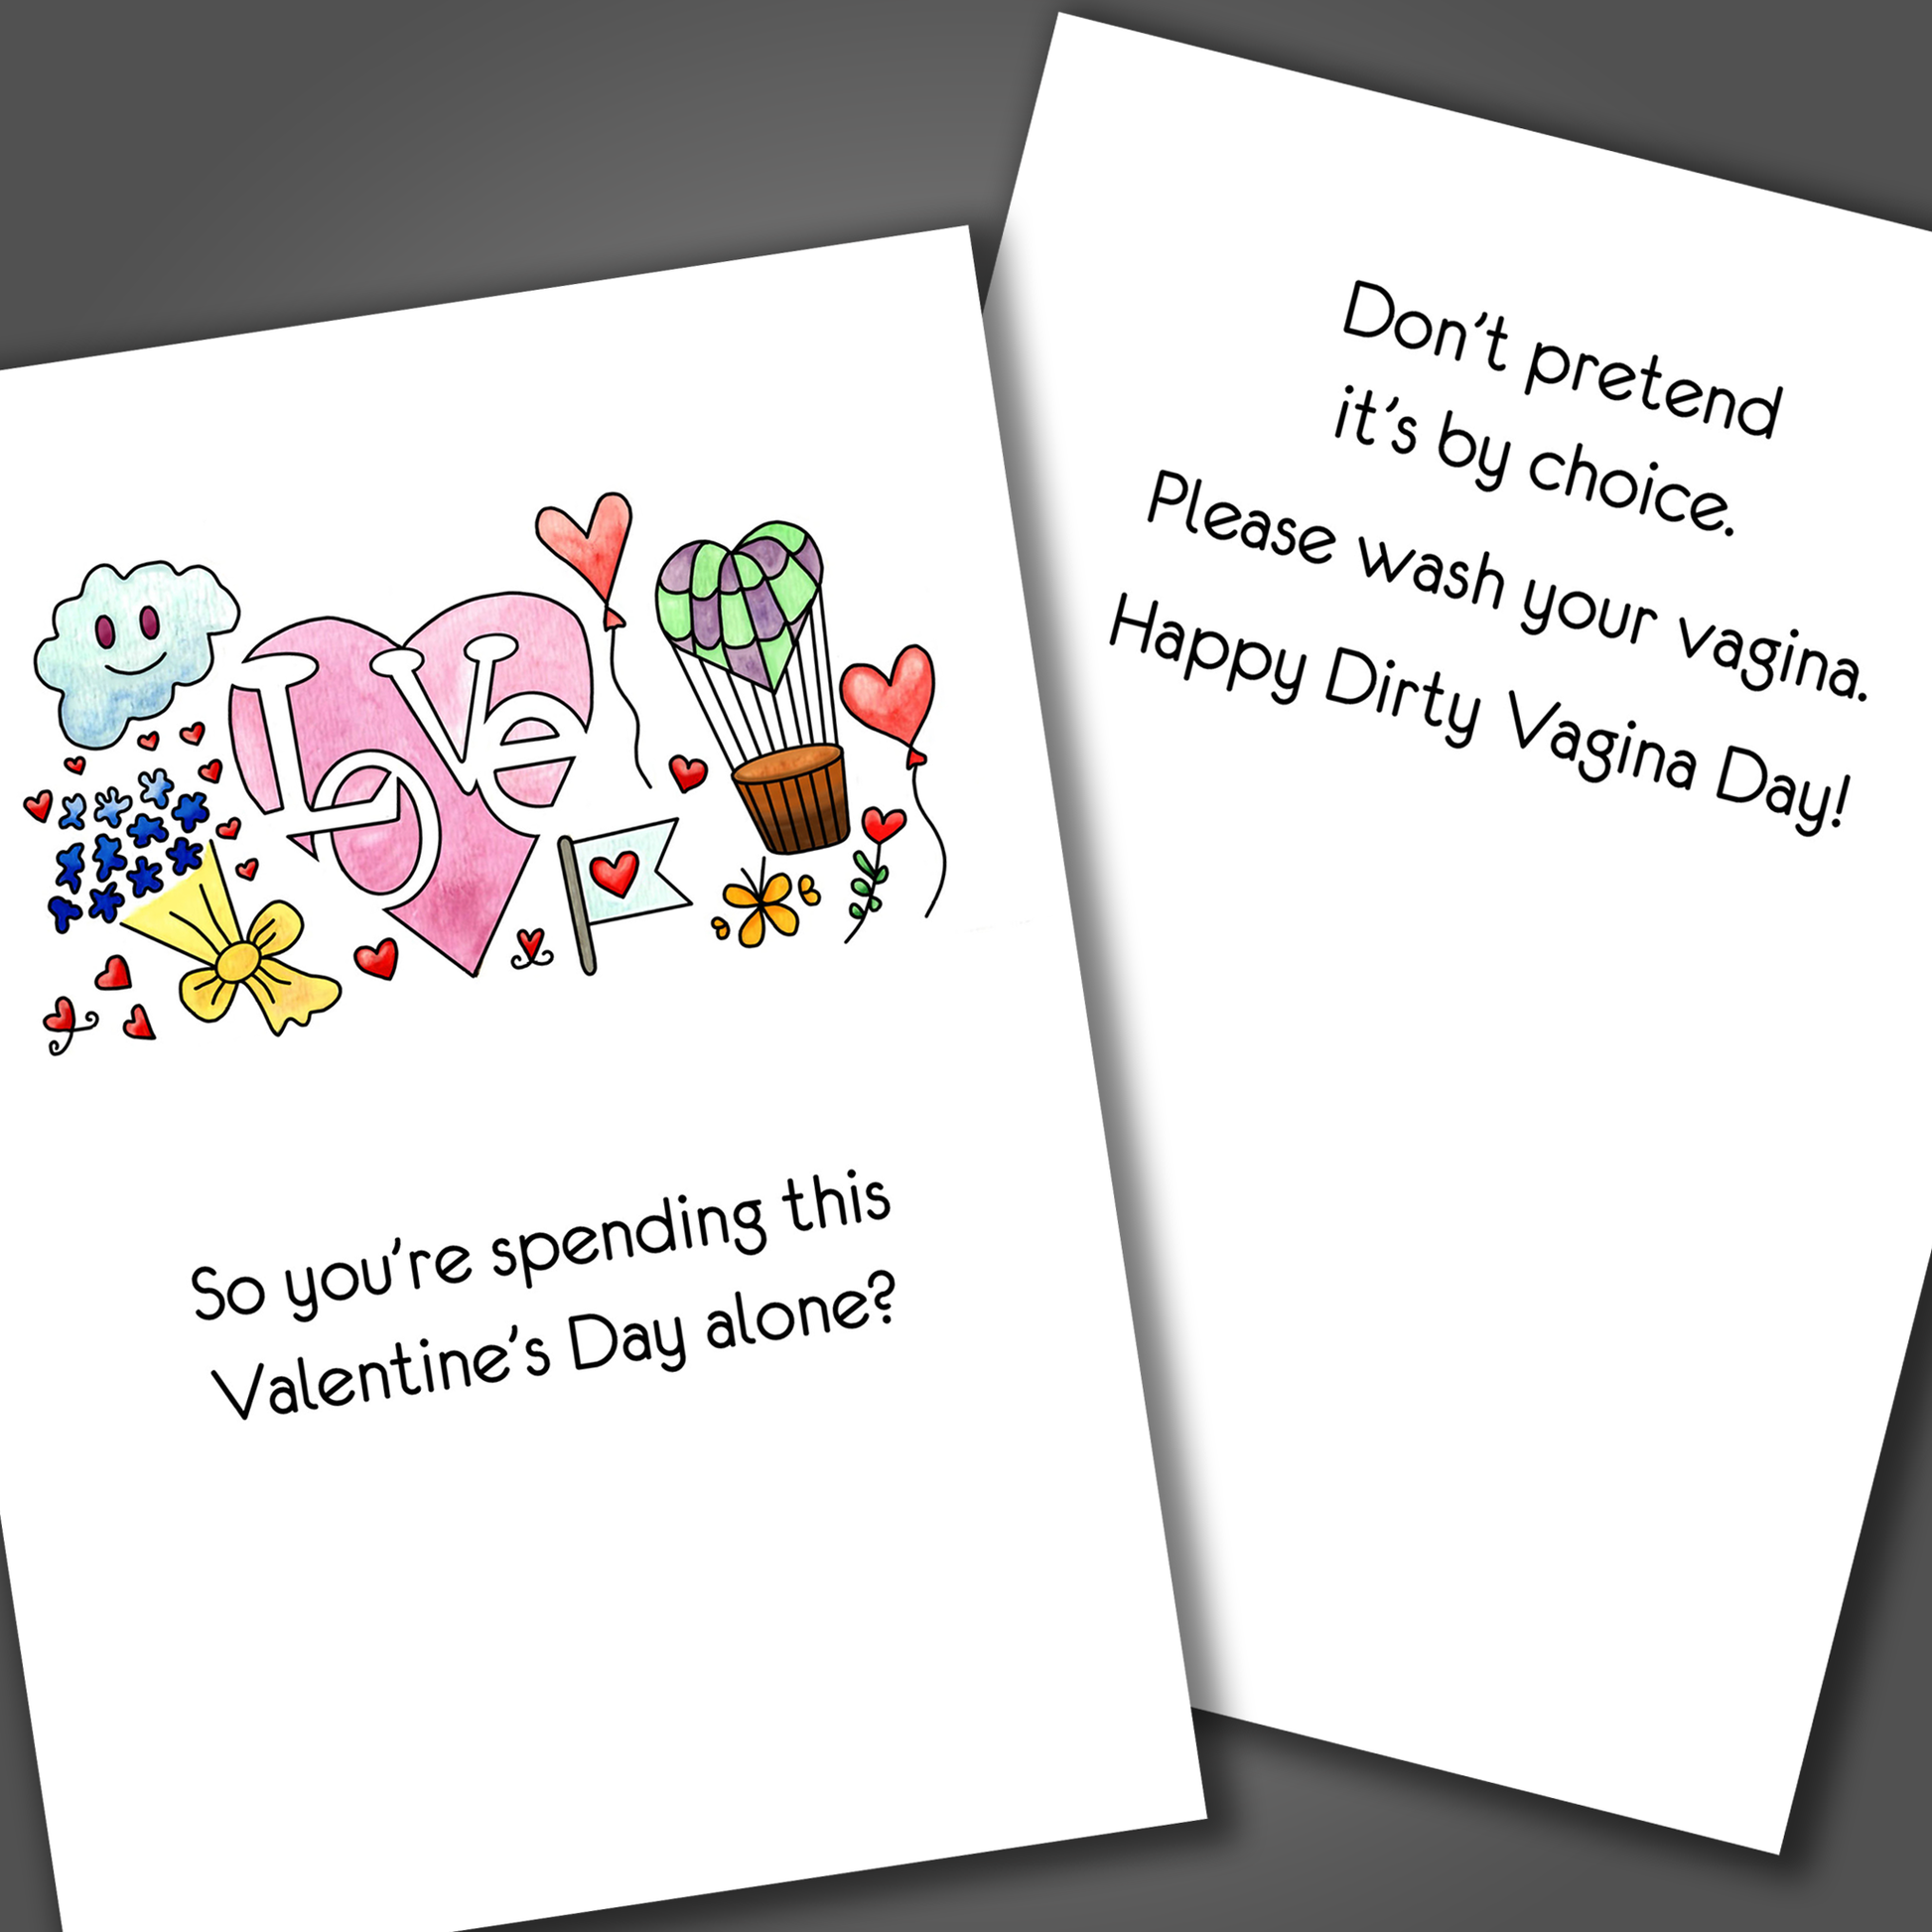 Funny Valentine's day card with the word love and a heart drawn on the front of the card. Inside the card is a funny joke tells the woman to wash her vagina and happy dirty vagina day!